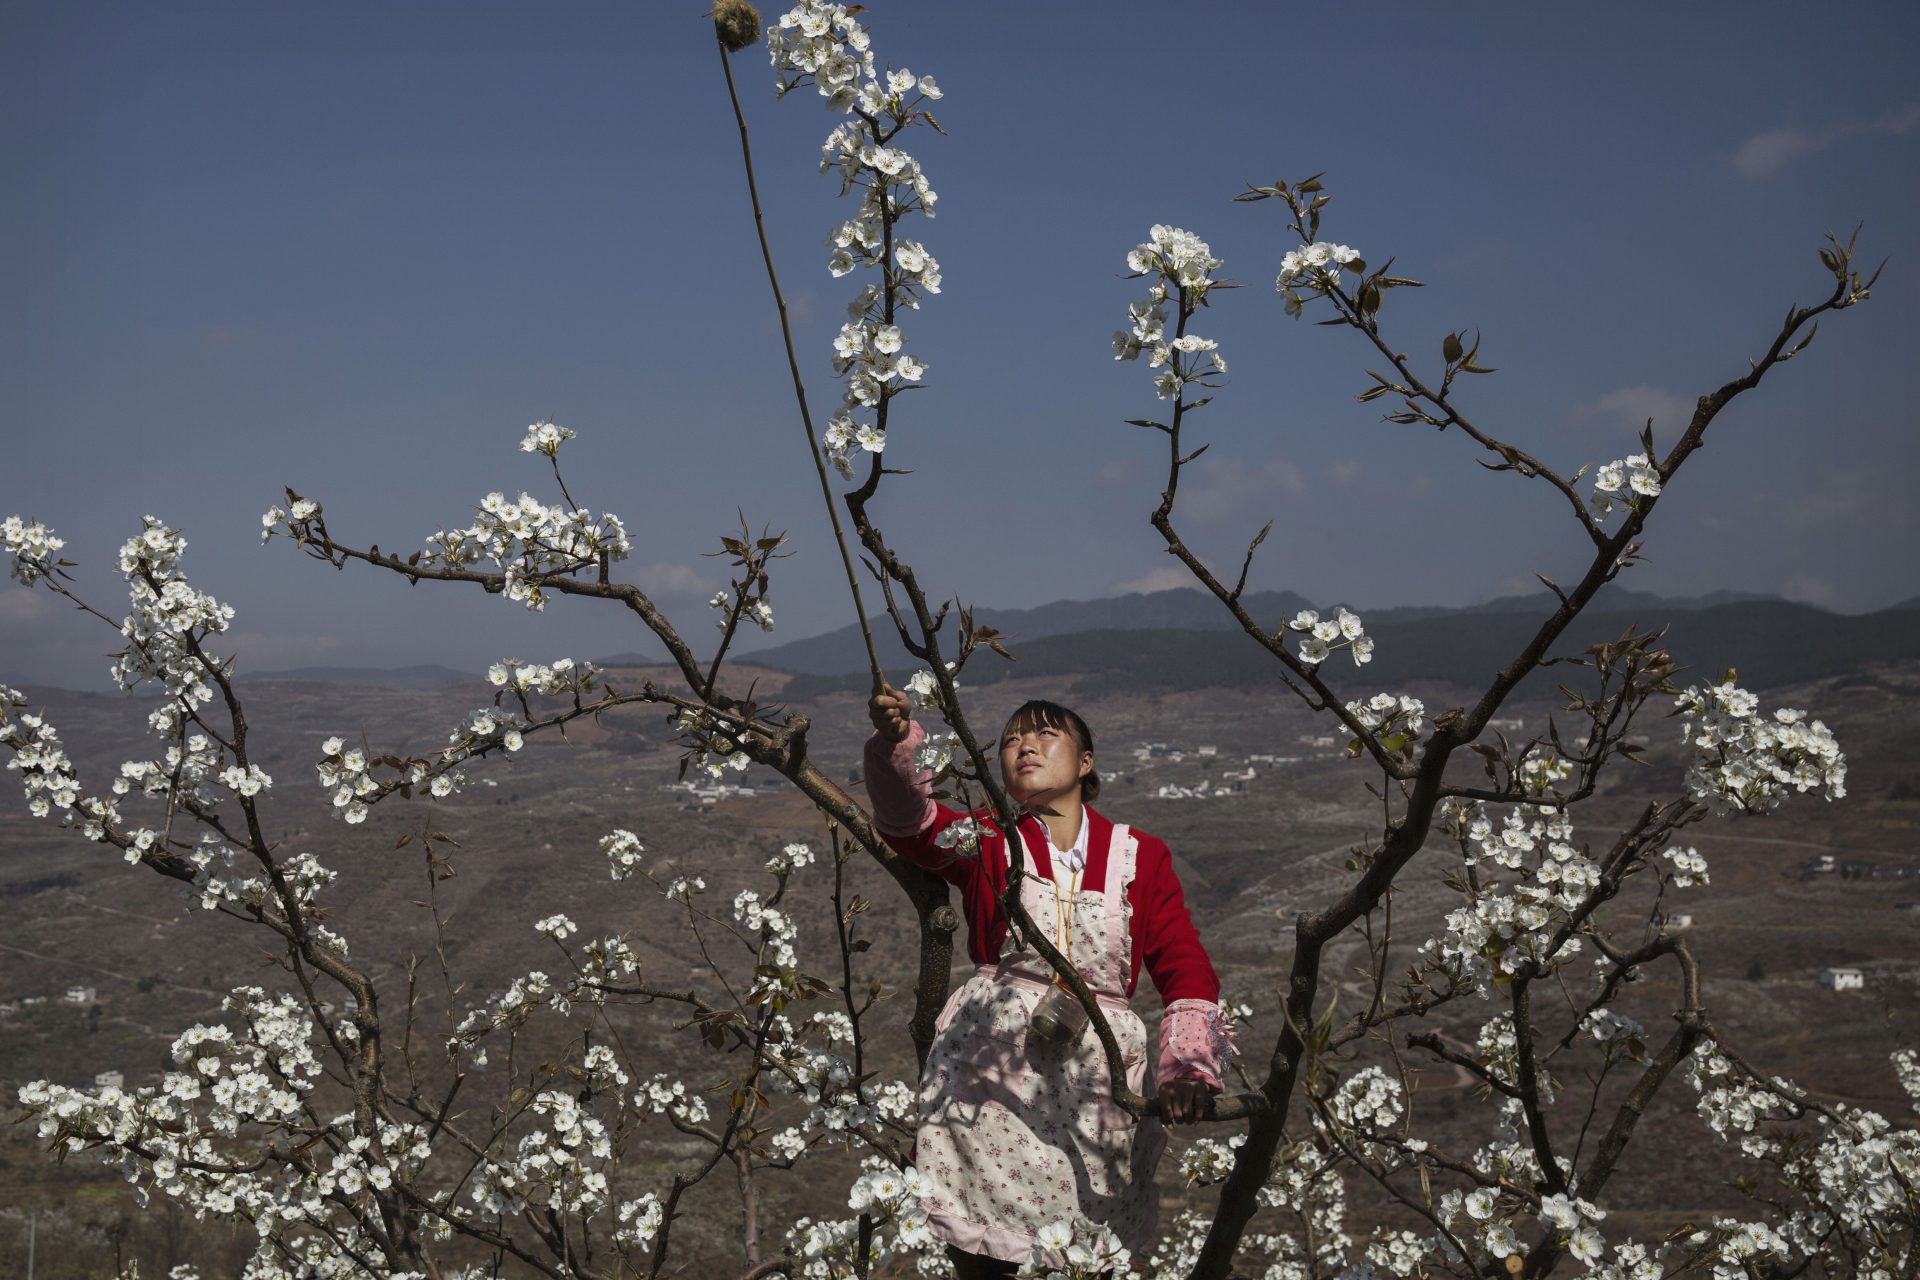 In China, people are having to pollinate by hand